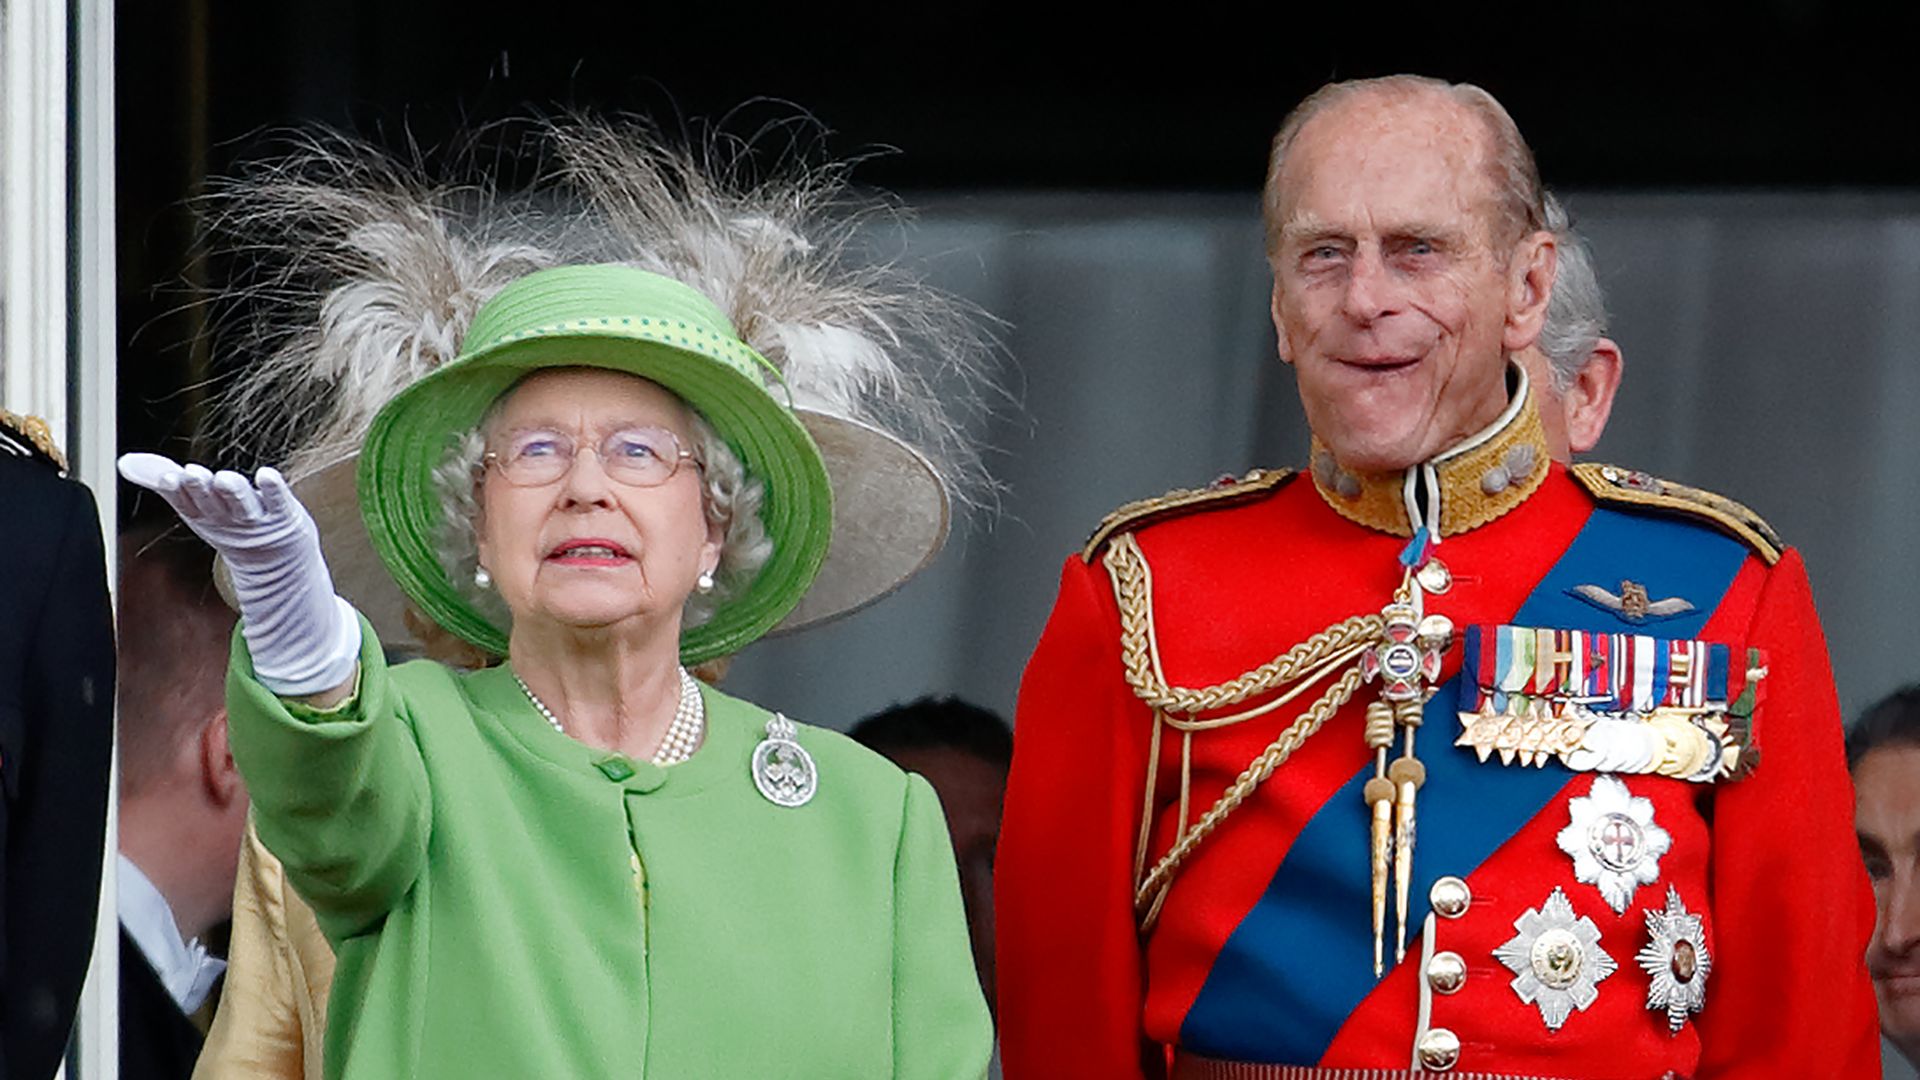 The Queen holding her hand out to check for rain stood next to Prince Philip